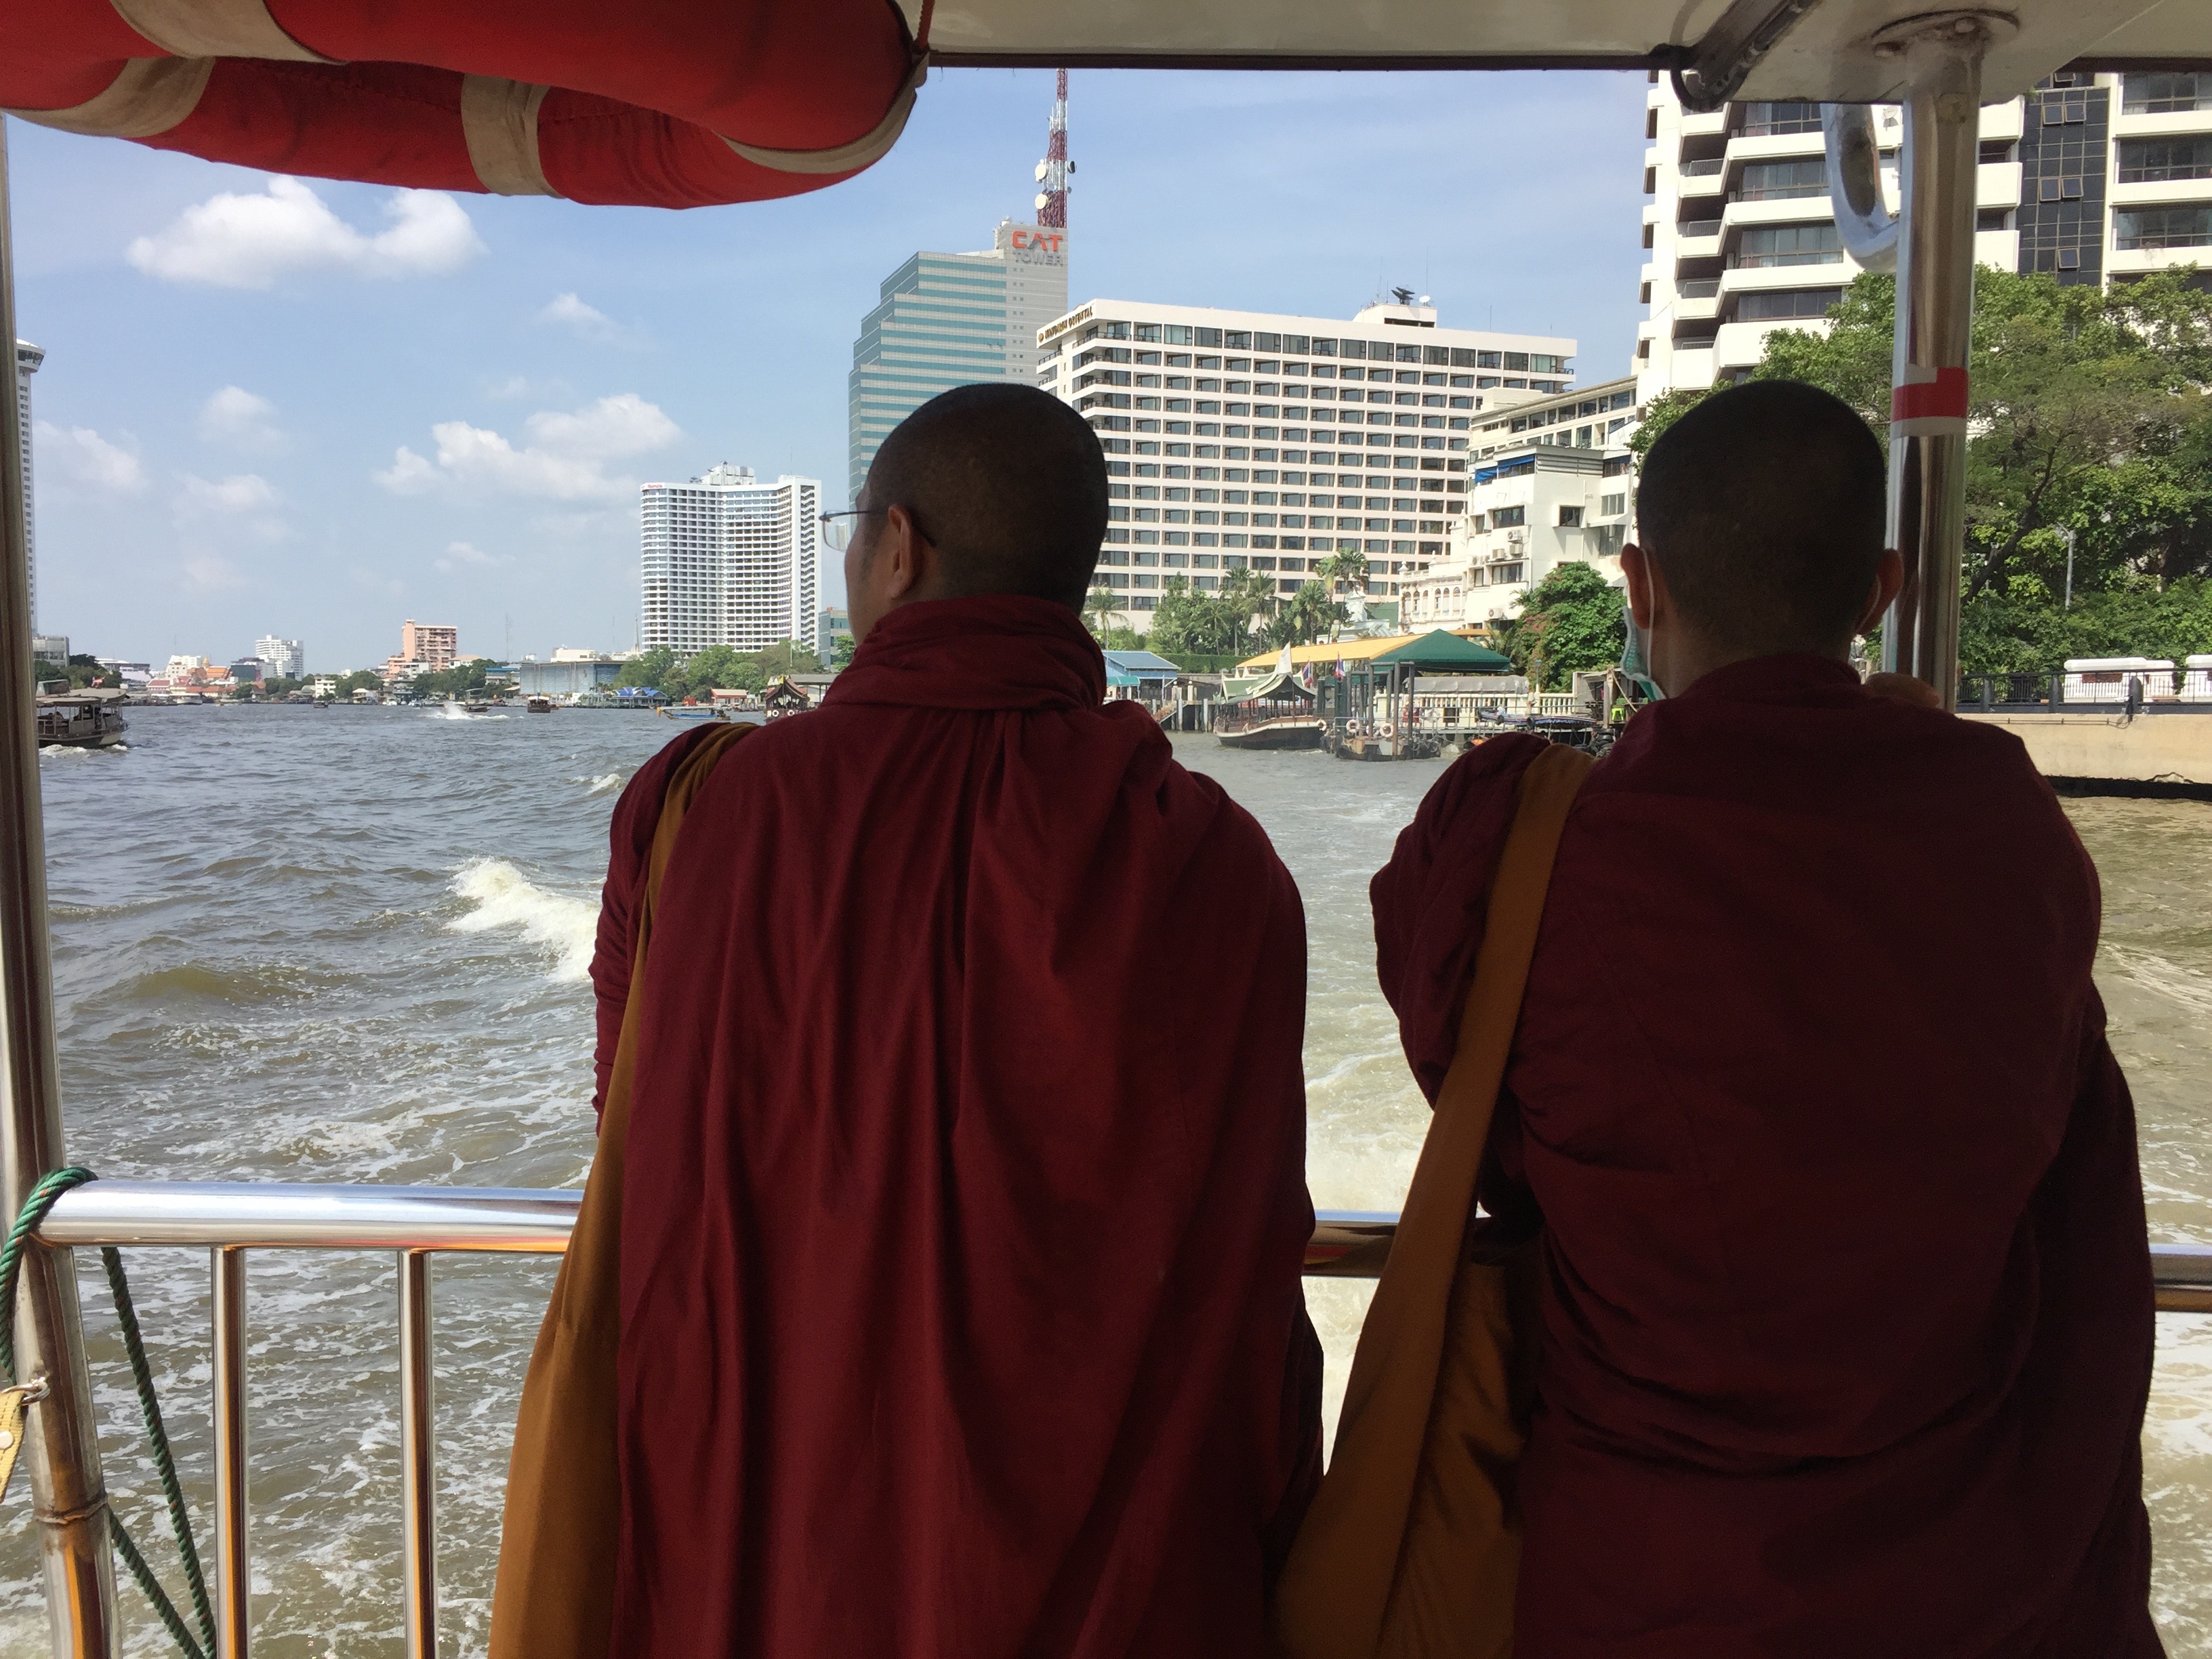 Monks on a ferry